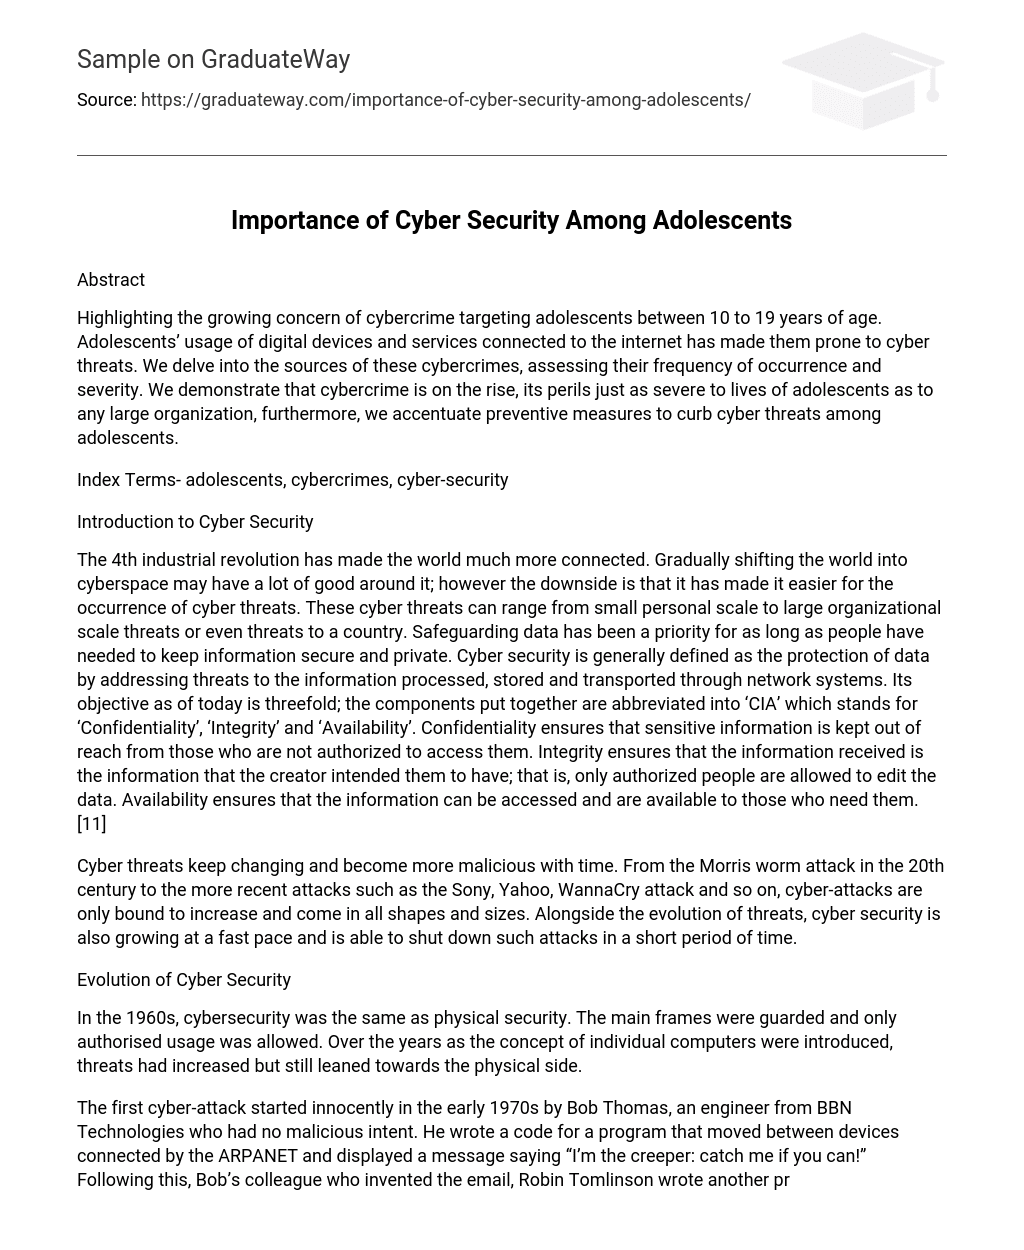 Importance of Cyber Security Among Adolescents